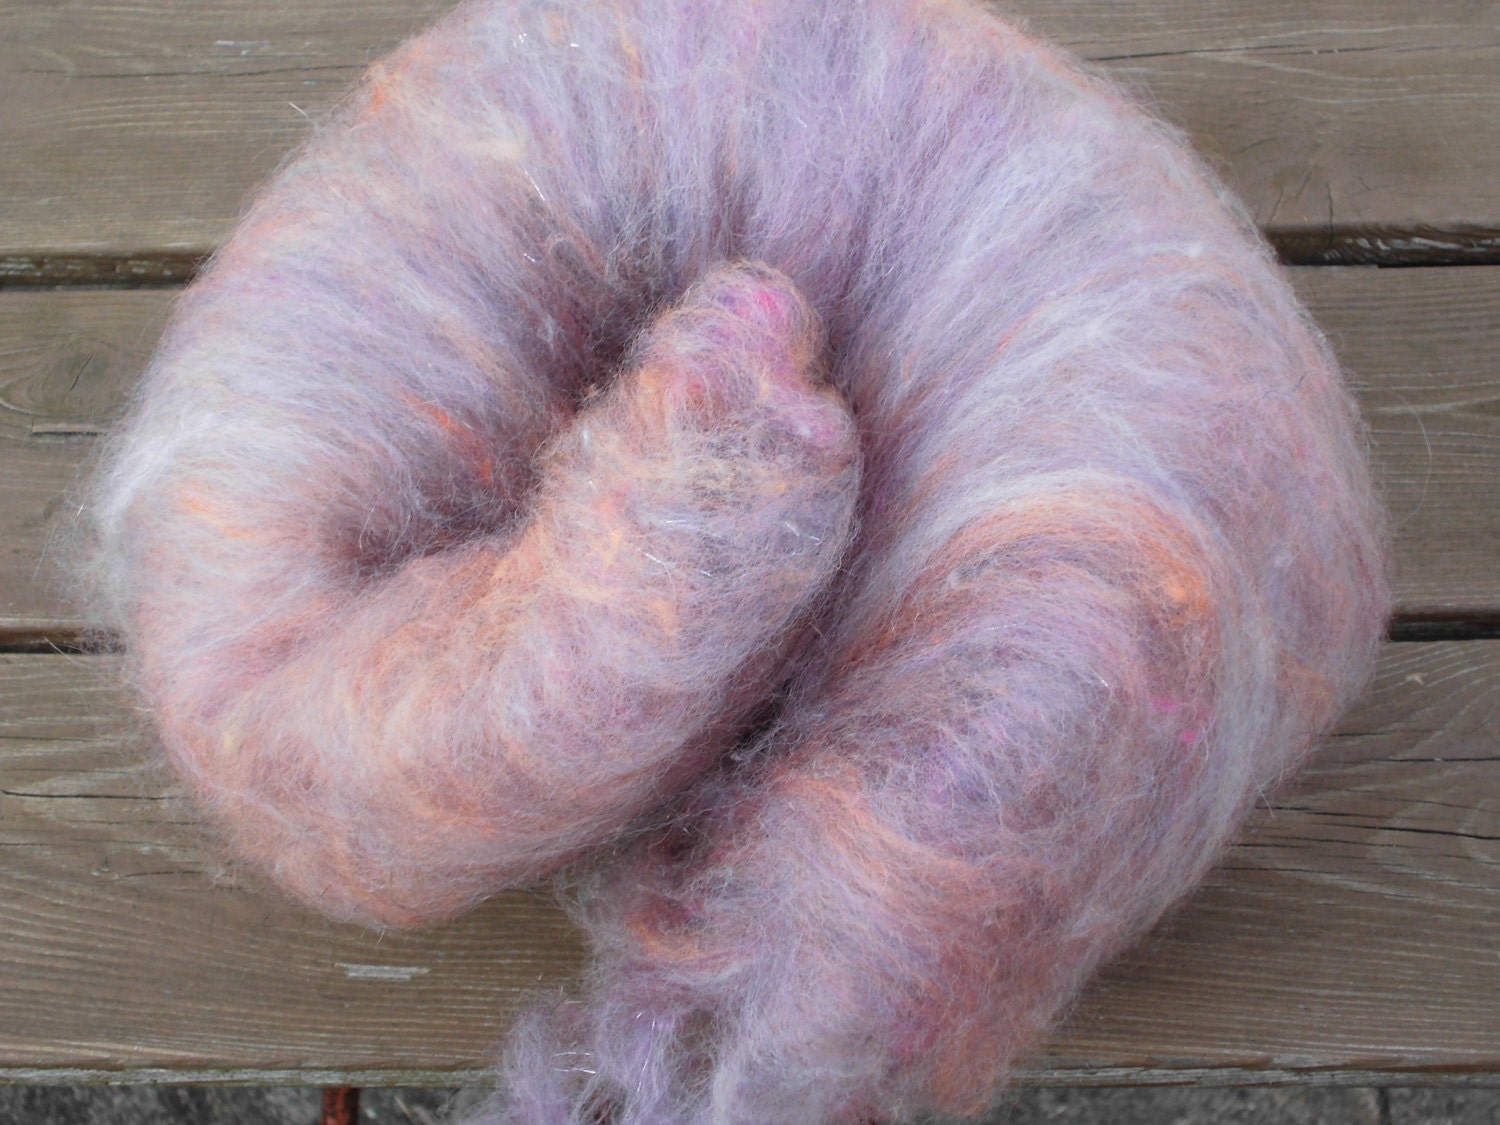 Drum Carded Hand Dyed Merino, Lambswool, Angora and Firestar for Sparkling Batt for Spinning or Felting "Candy Floss" - SussesSpindehjrne